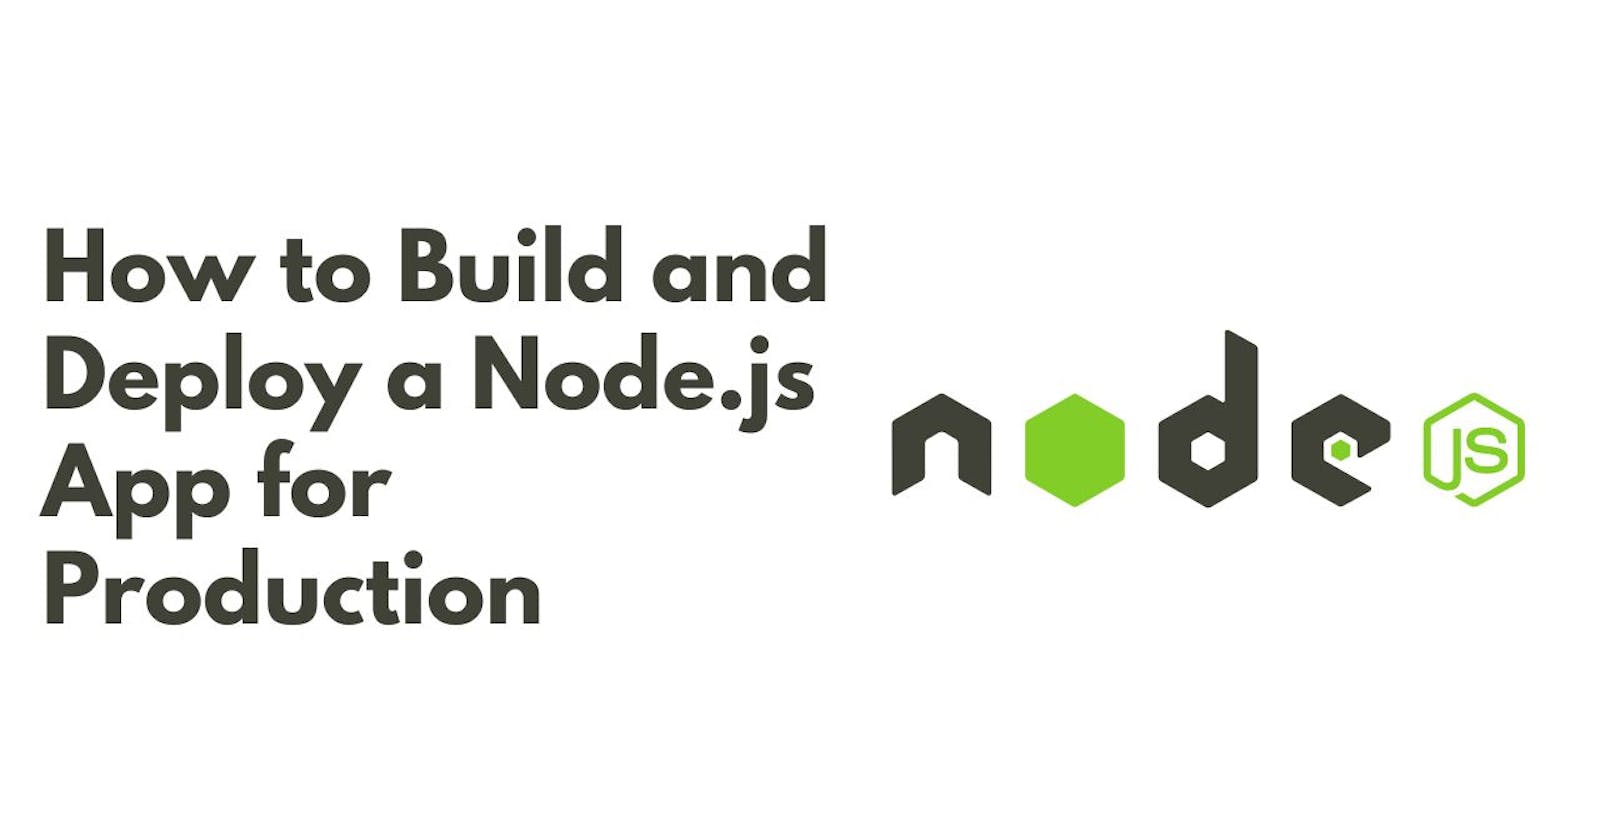 How to Build and Deploy a Node.js App for Production